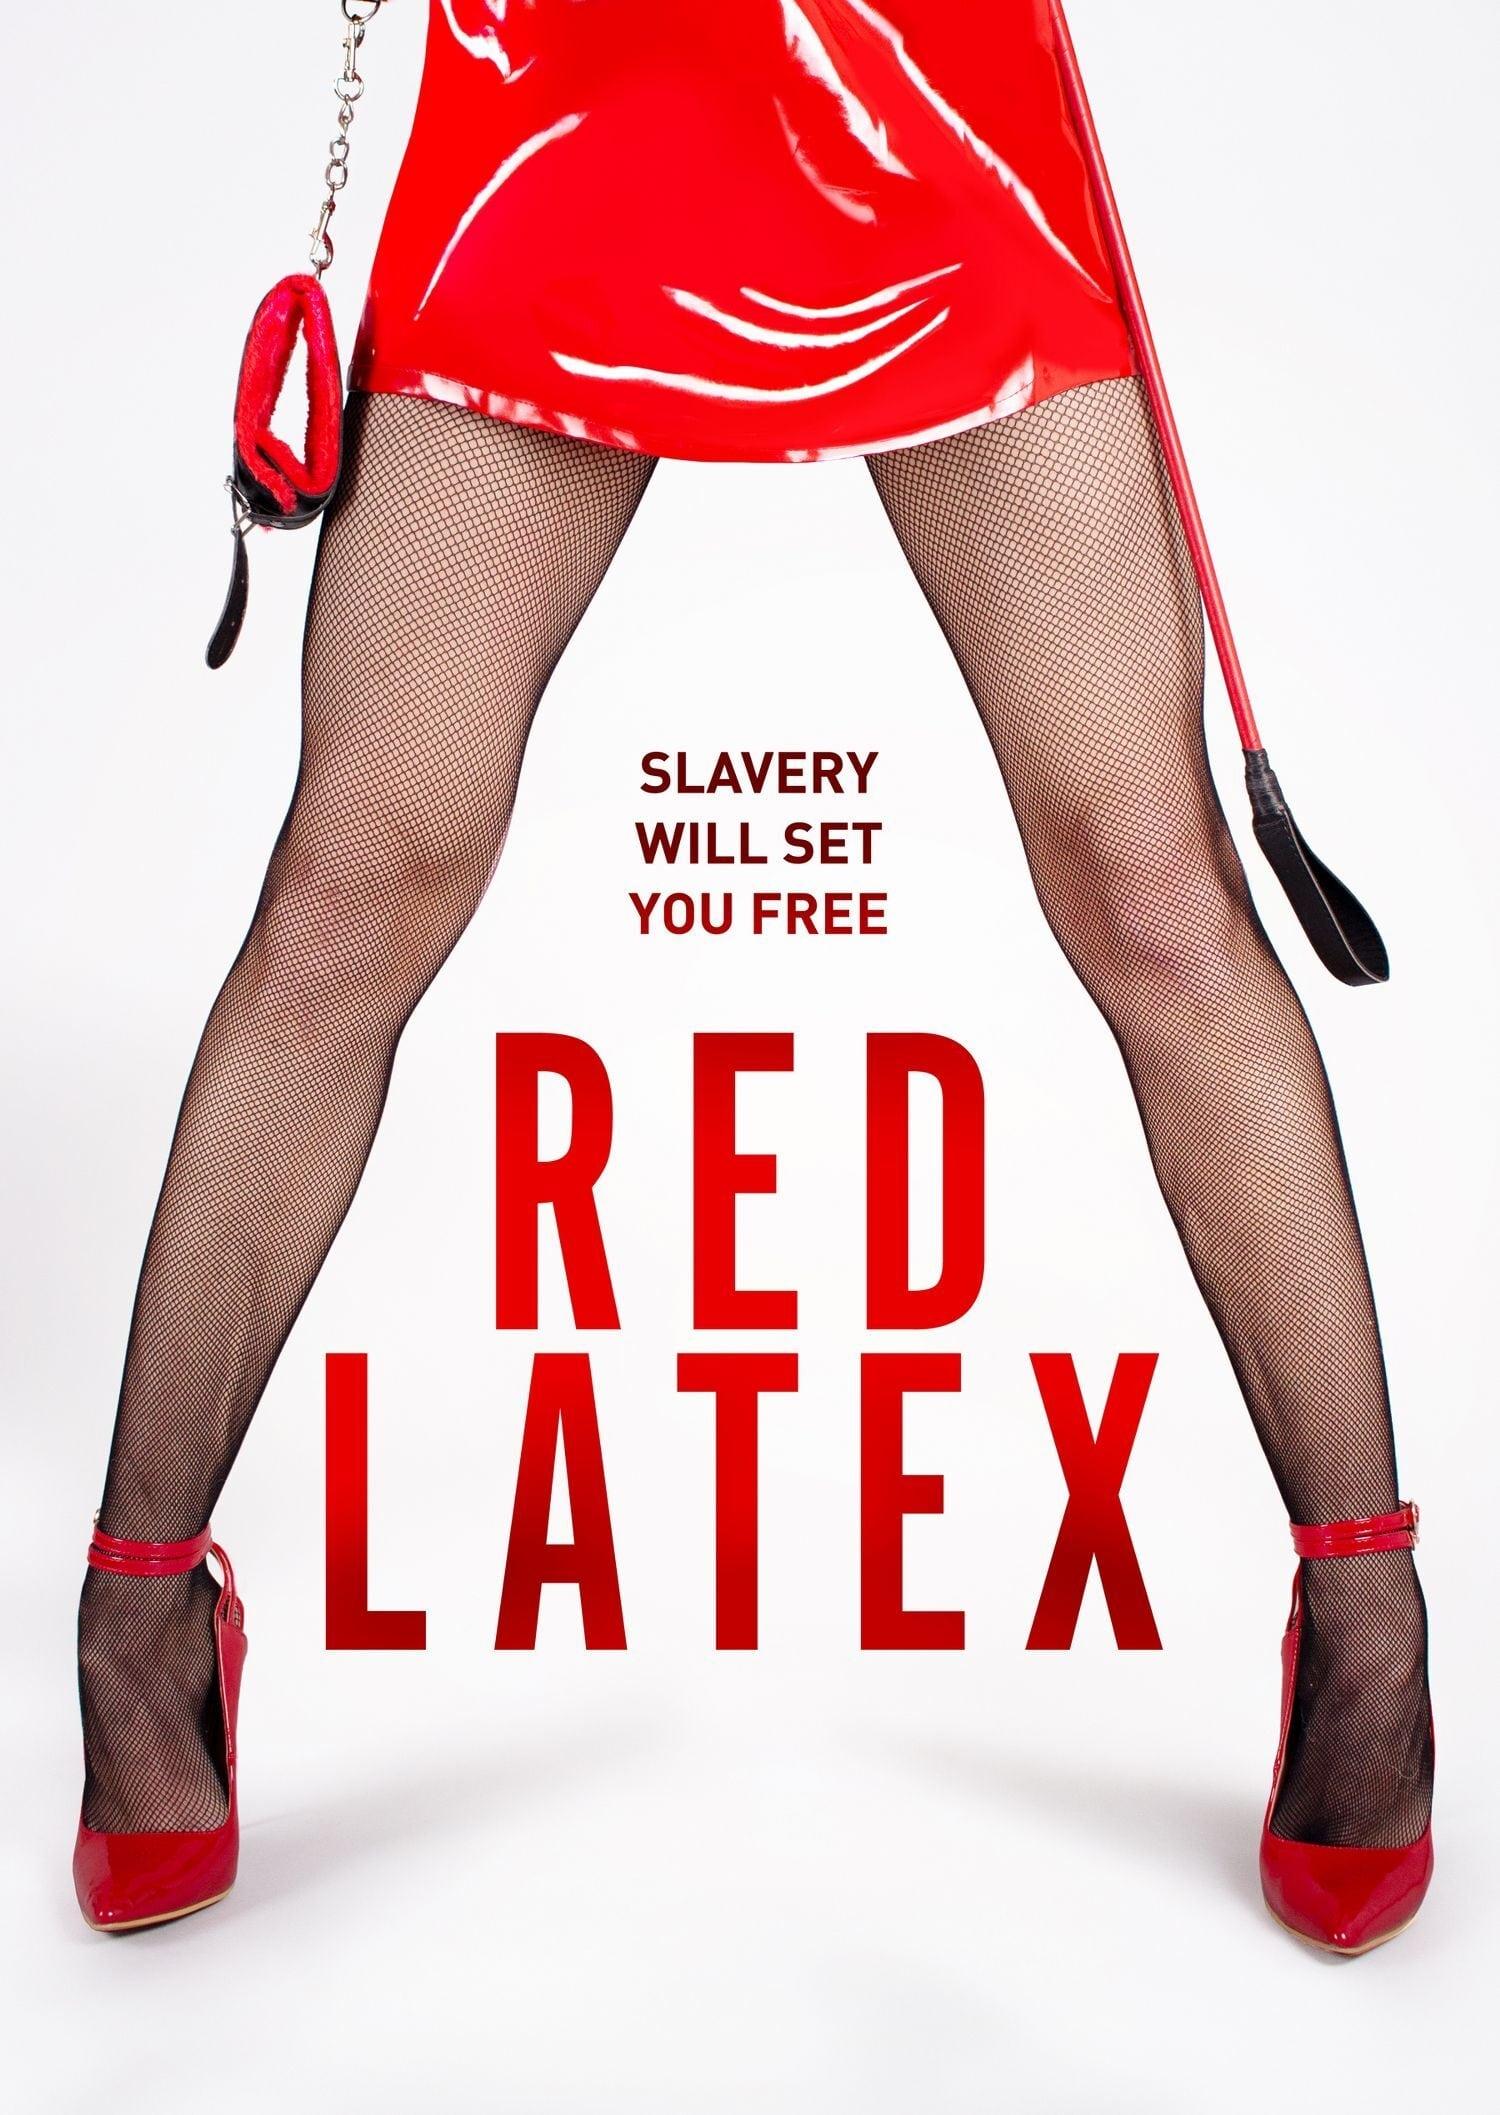 Red Latex poster